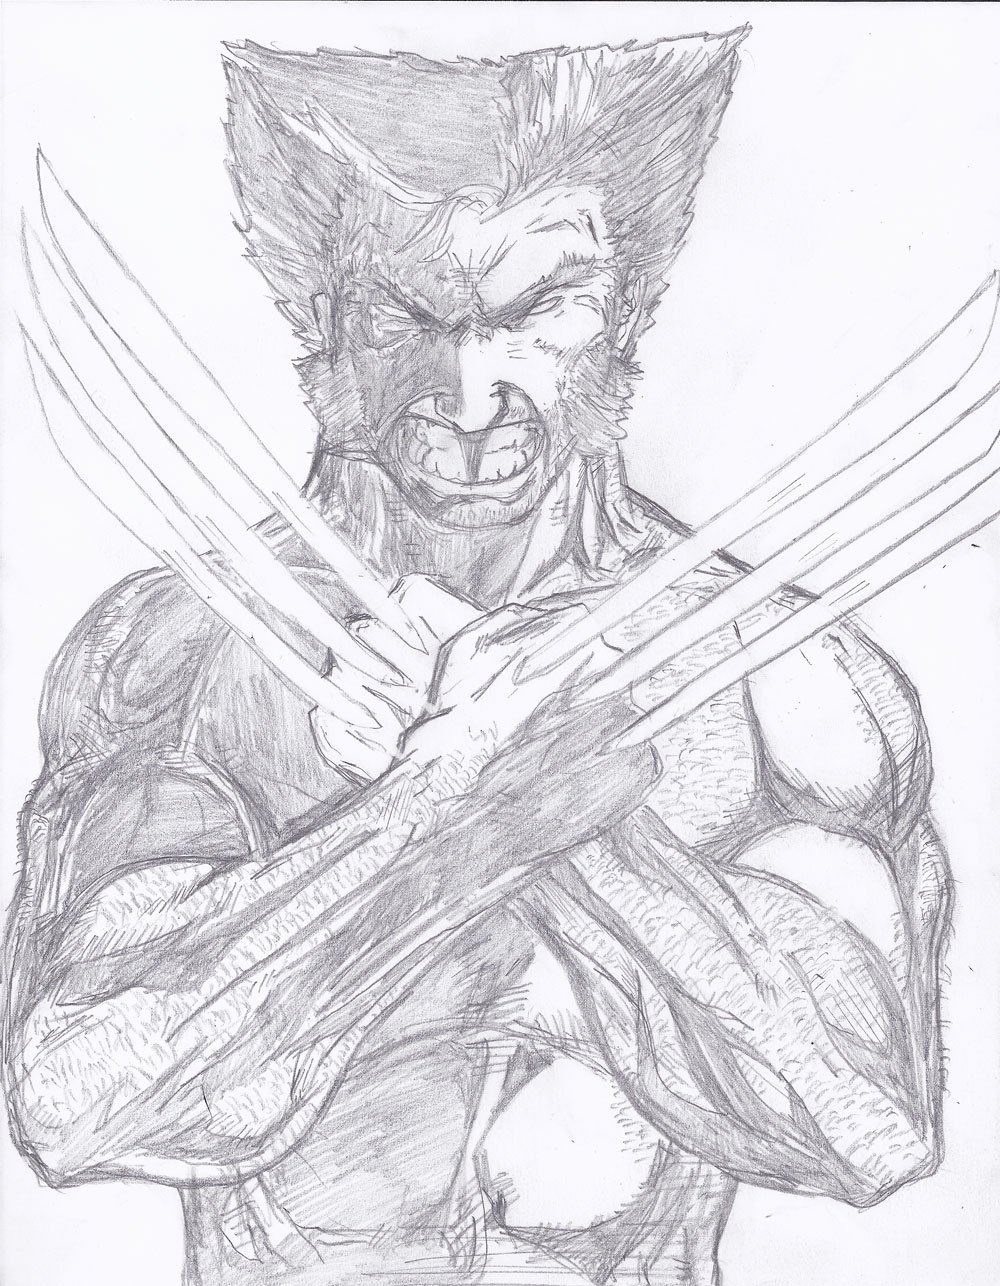 Wolverine in the shadows